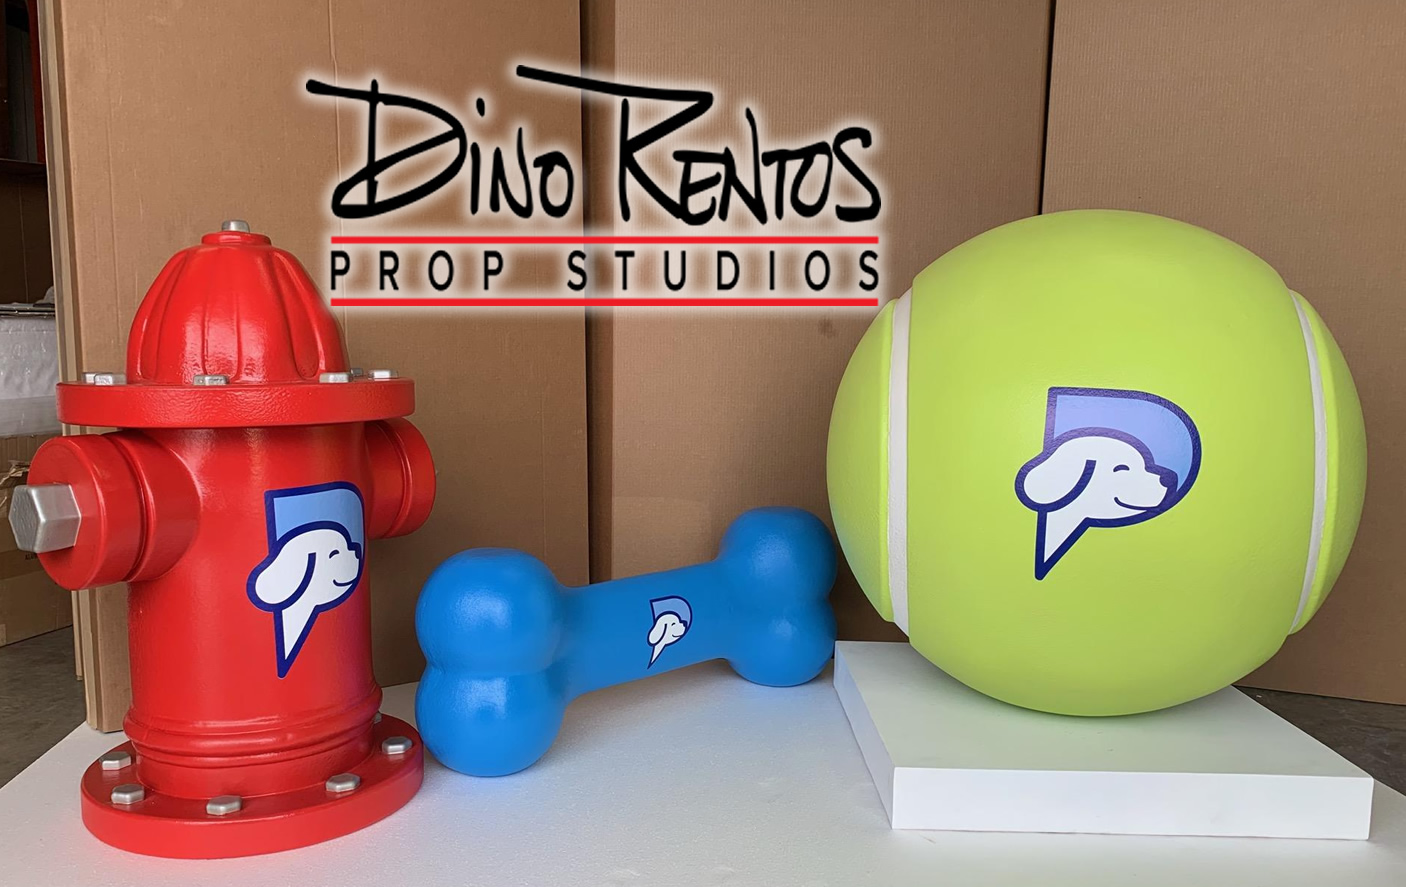 Custom Foam Pet Toys Hydrant Tennis Ball Bone for PetPartners display for tradeshows and events 